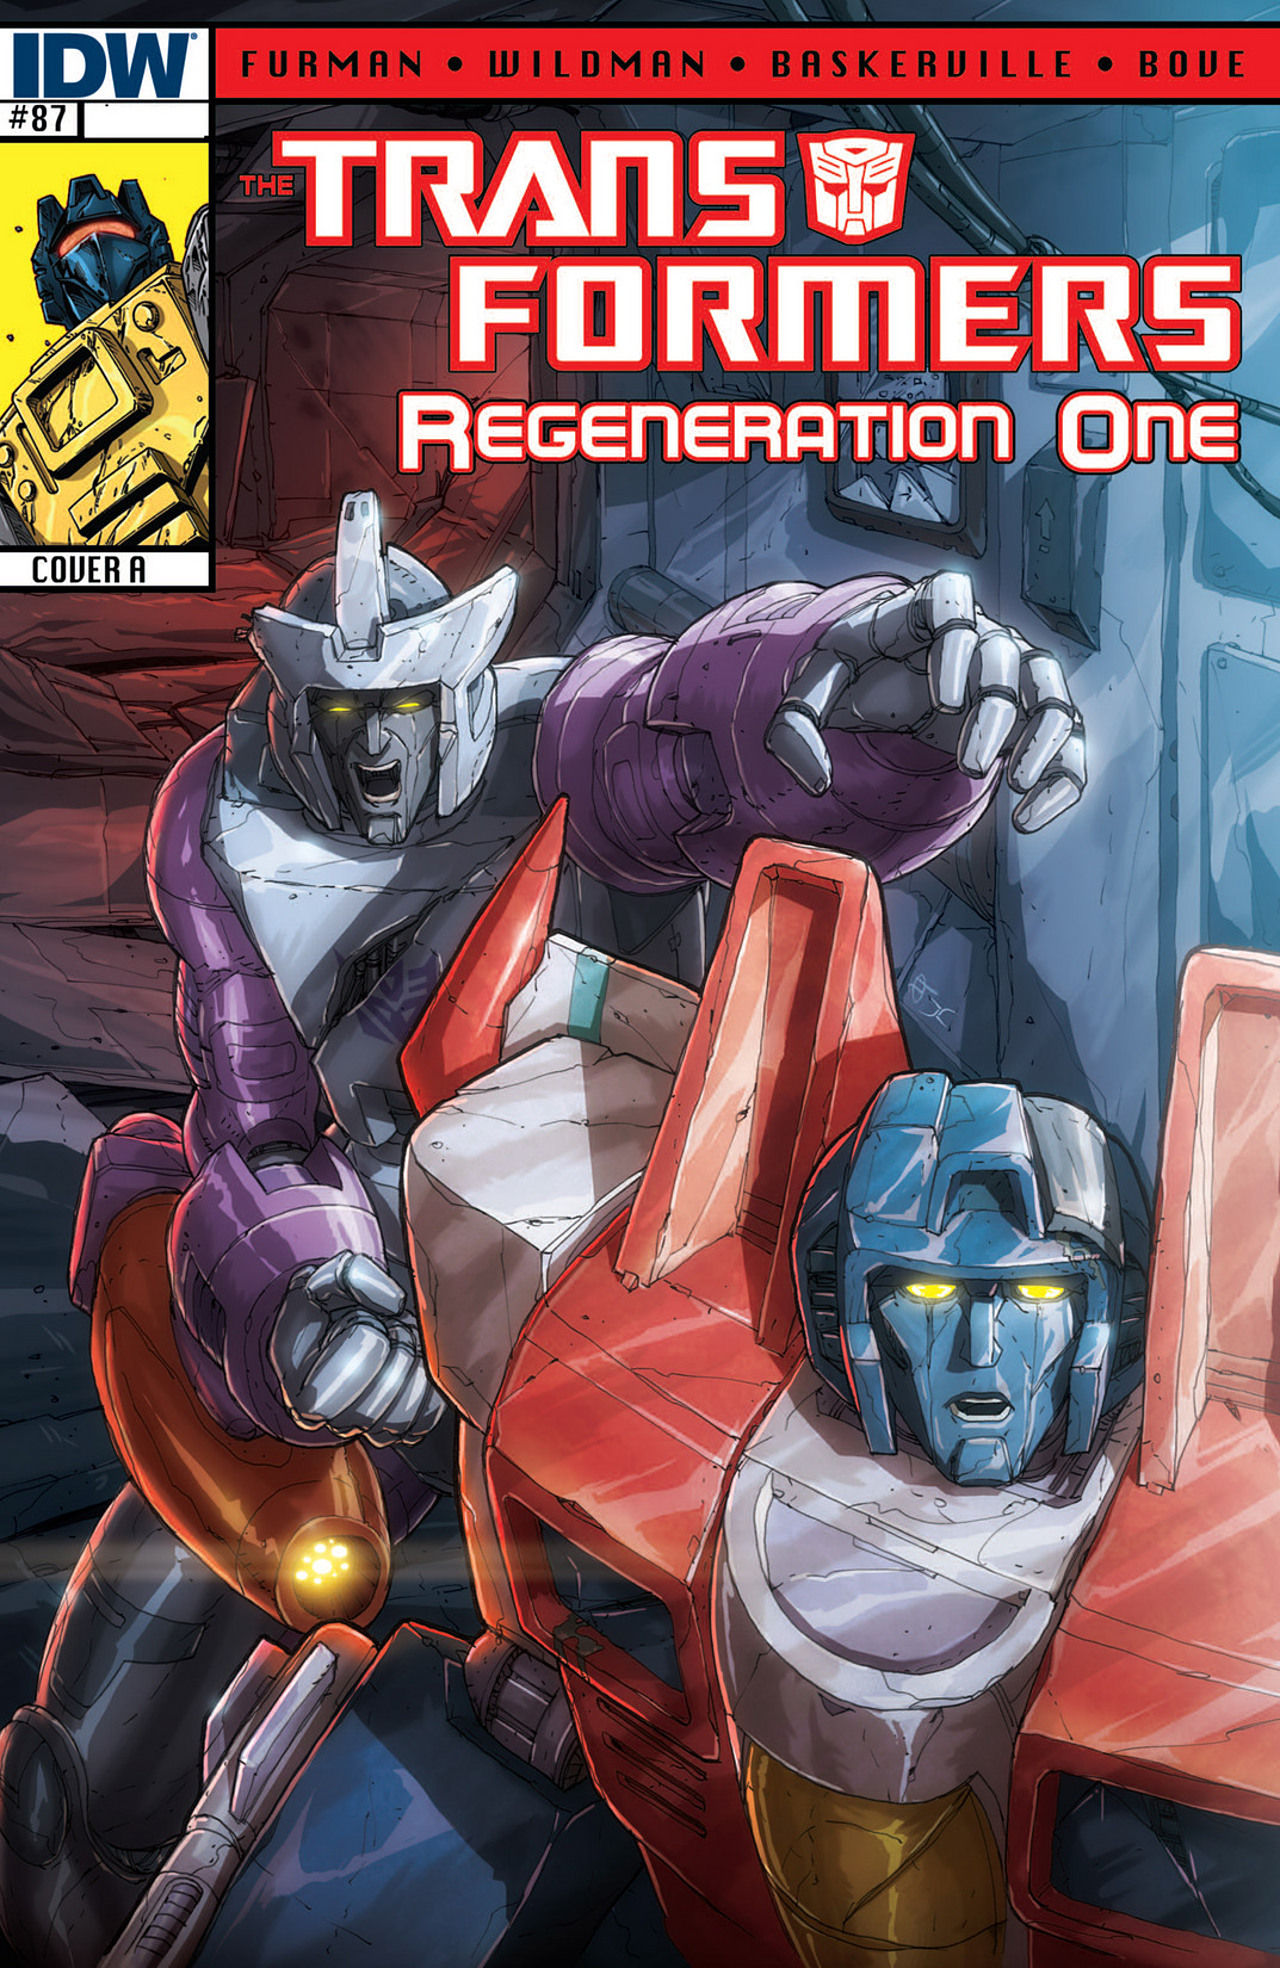 Read online The Transformers: Regeneration One comic -  Issue #87 - 1